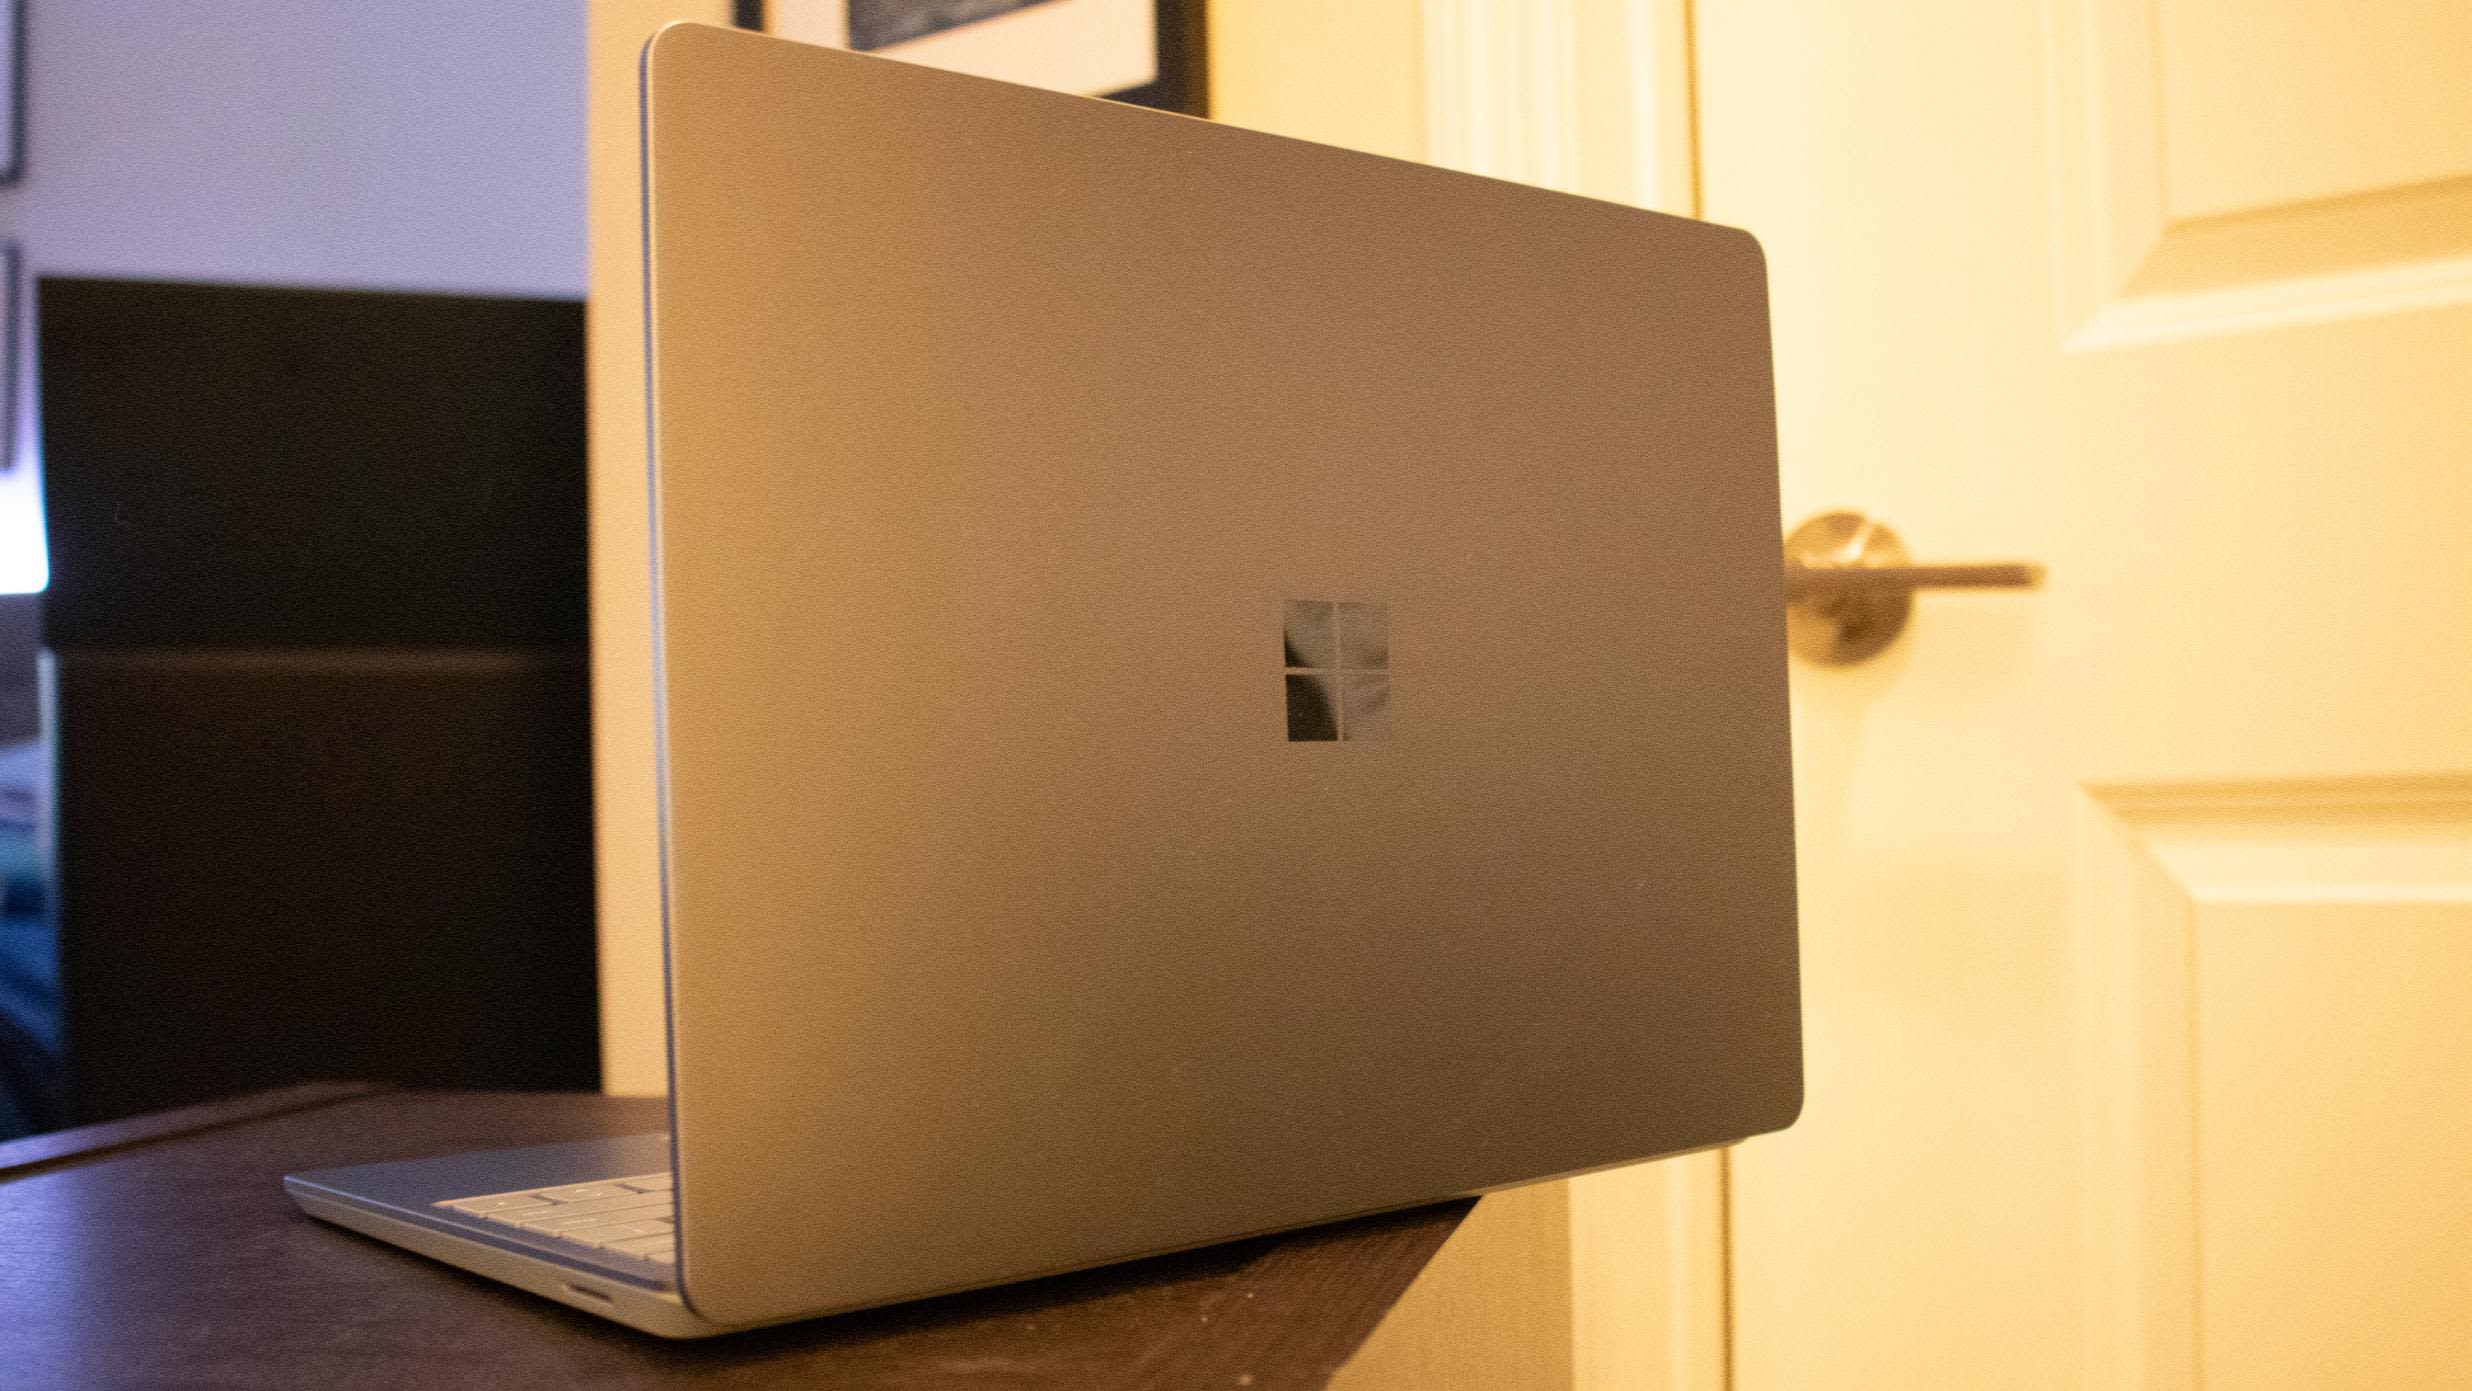 Microsoft's Surface Laptop Go 3 is one capable budget laptop